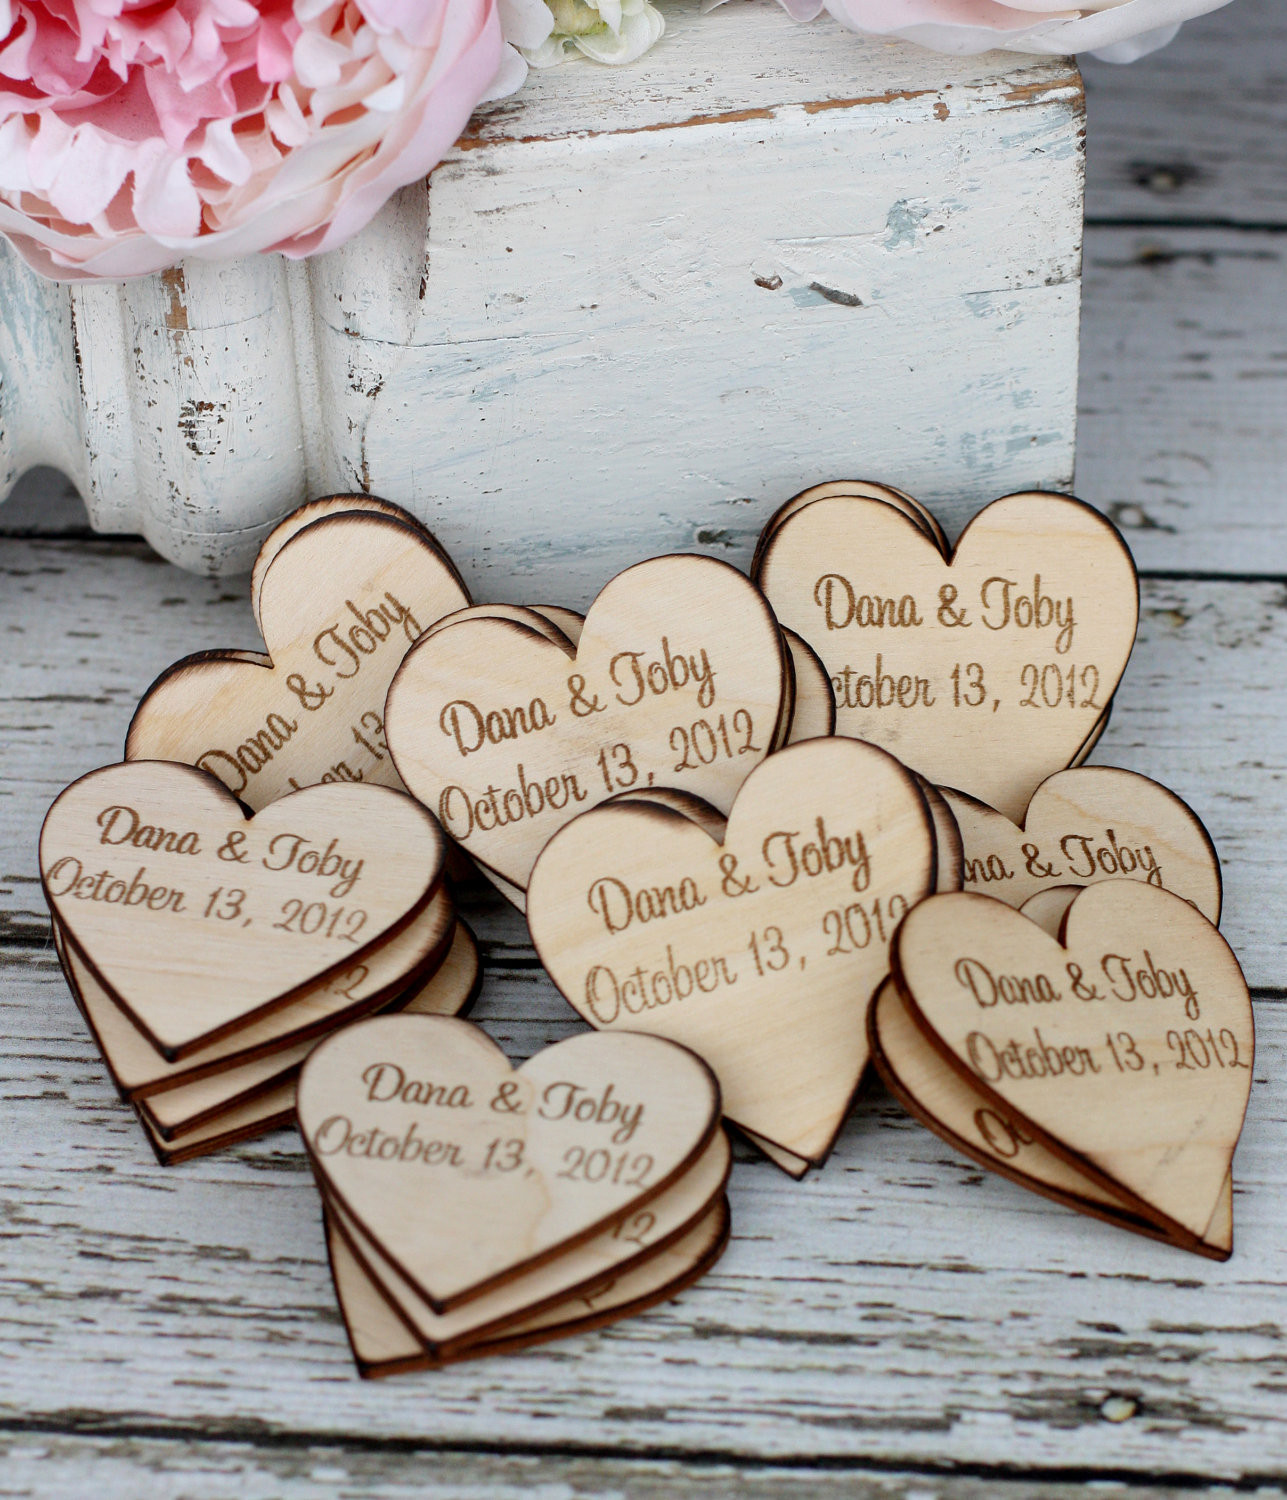 DIY Rustic Wedding Favors
 Unavailable Listing on Etsy